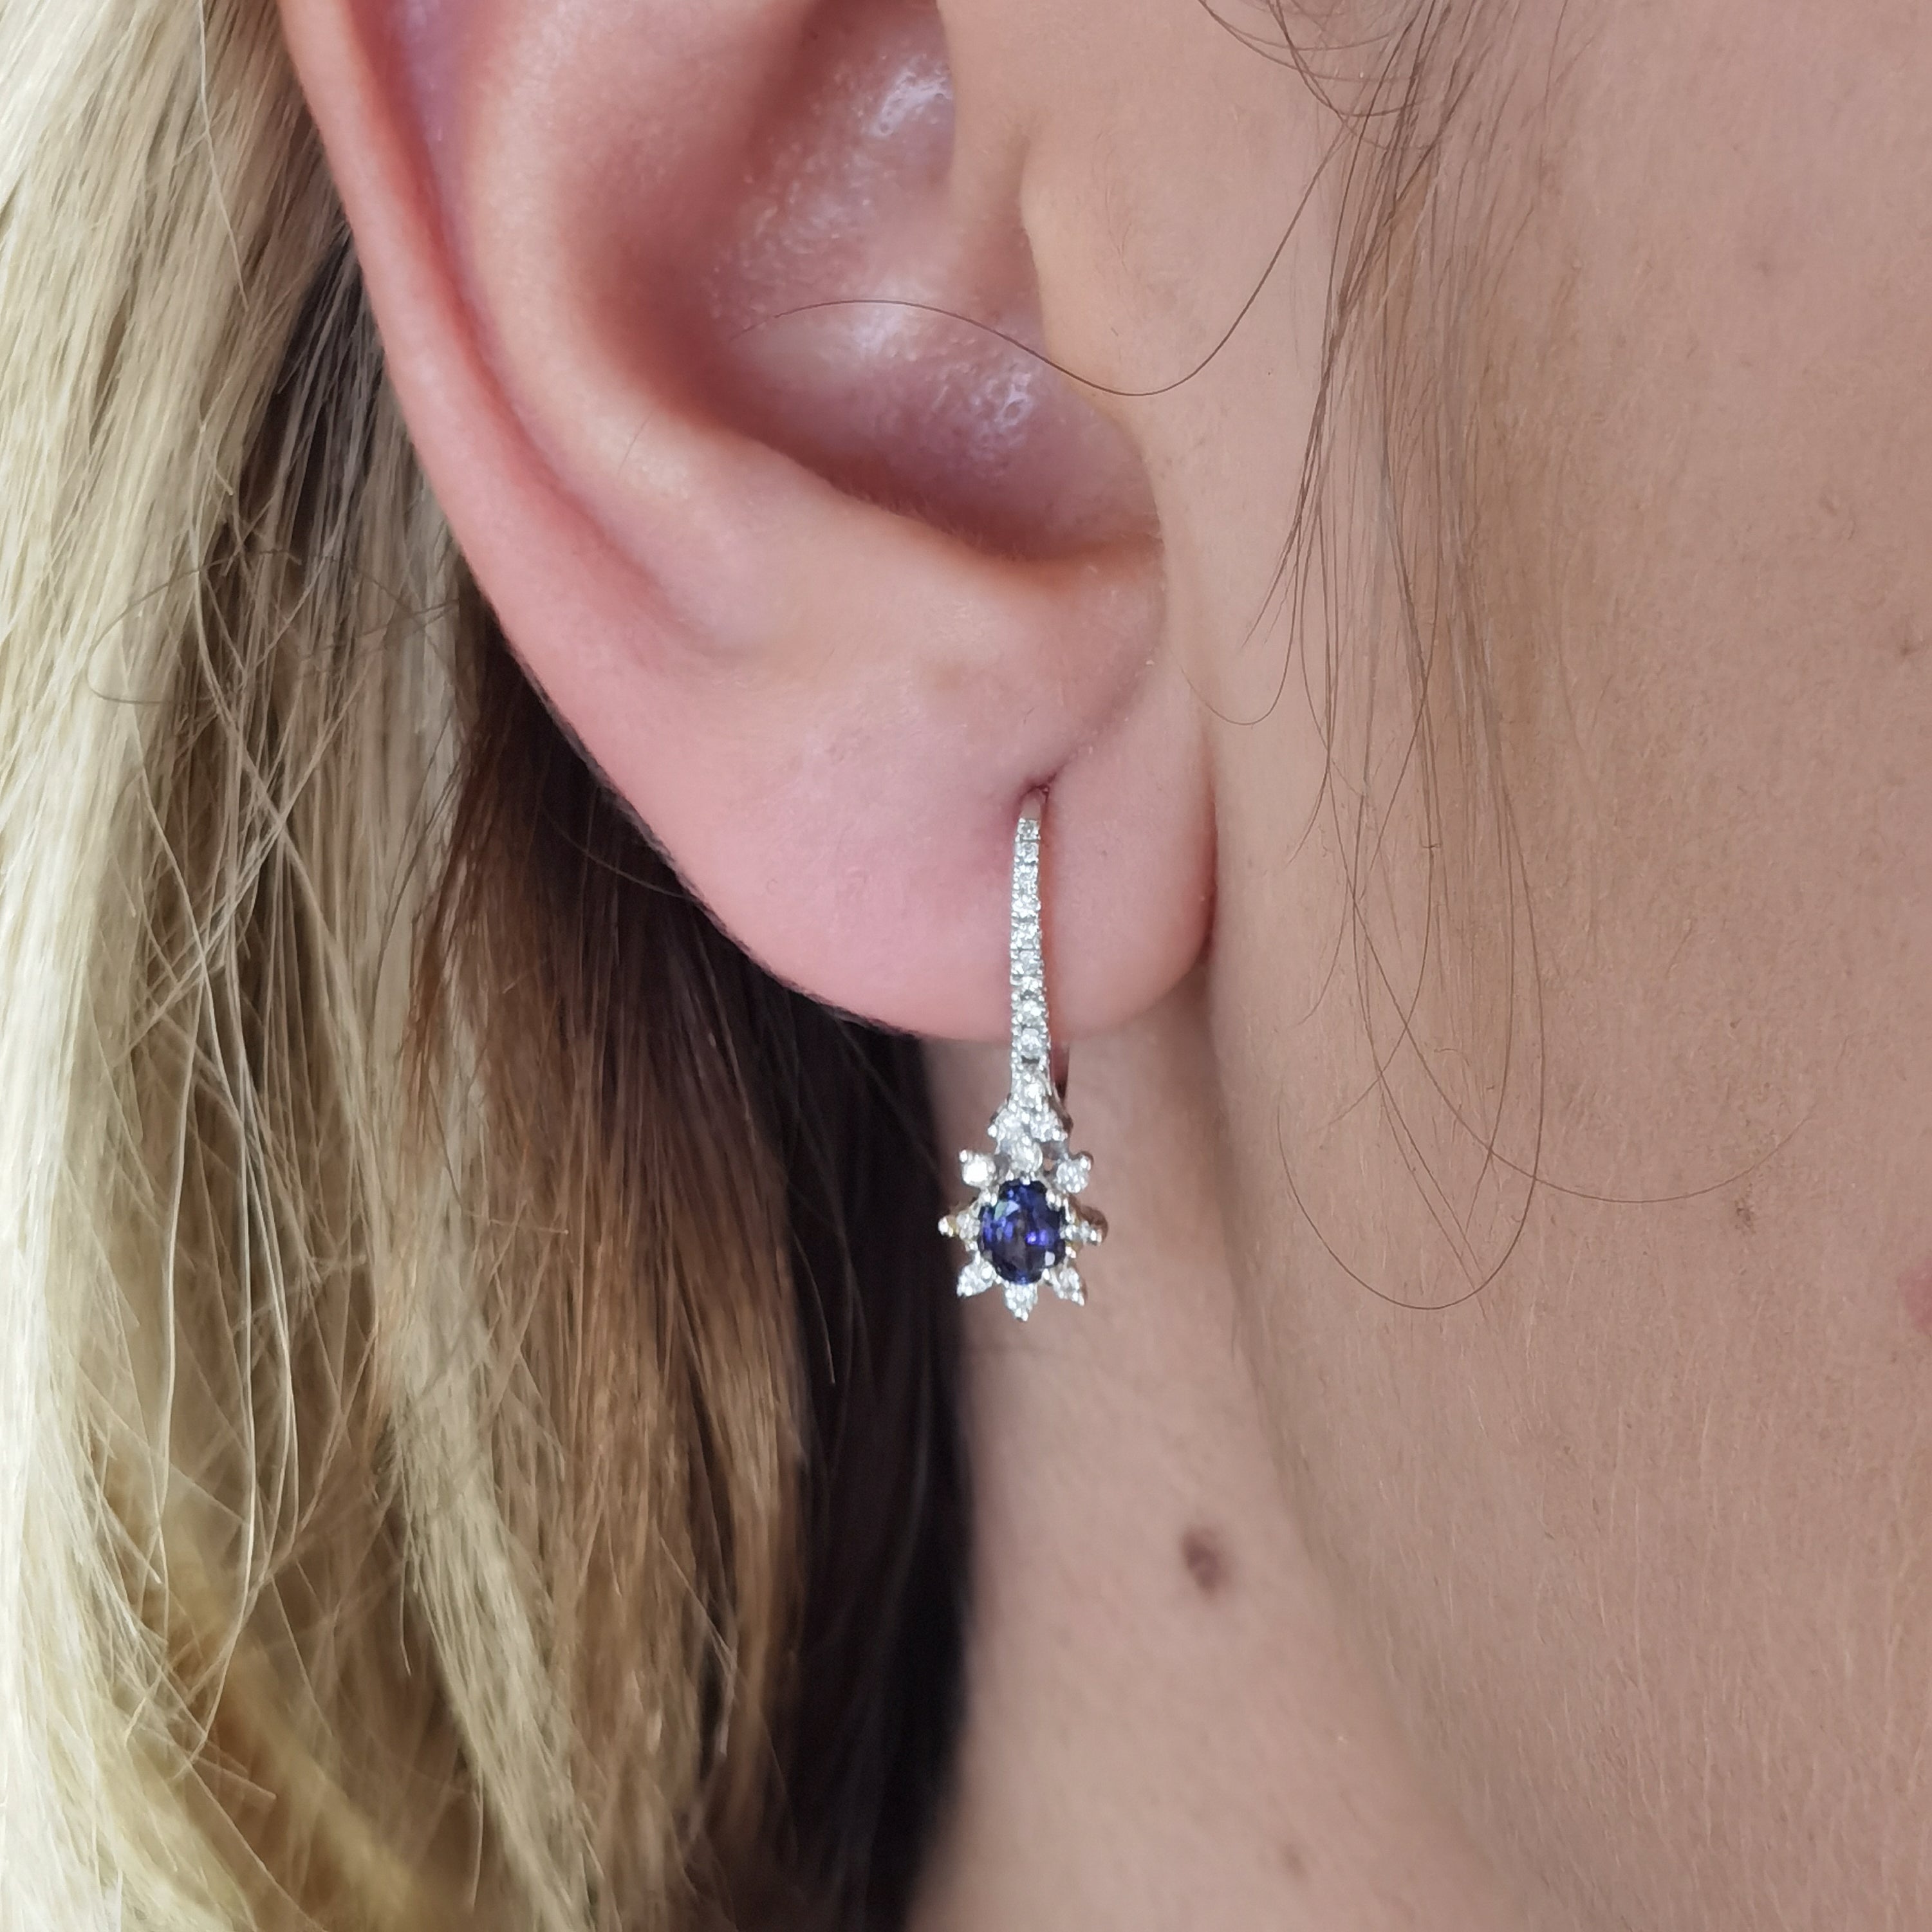 Star earrings with central sapphires and diamonds